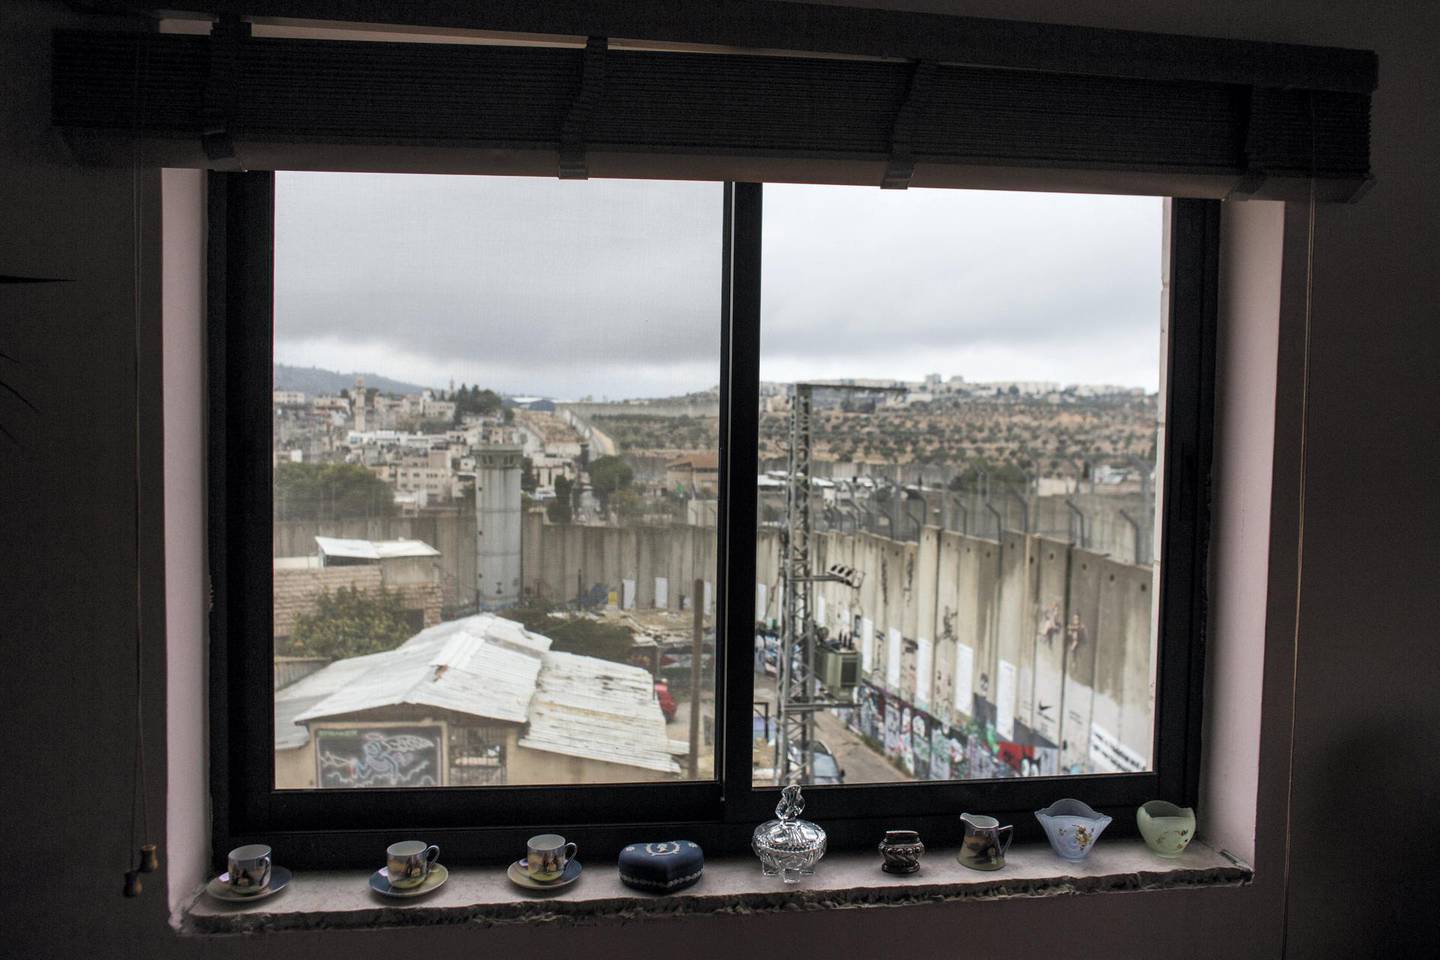 A view from one of the guest rooms at Bansky's ,The Walled-Off hotel in the Palestinian city of Bethlehem on November 24,2018 .The 8 metre-high concrete wall built by Israel is seen from both windows in the room .The hotel boosts that "it has the worst view in the world".Photo by Heidi Levine for The National